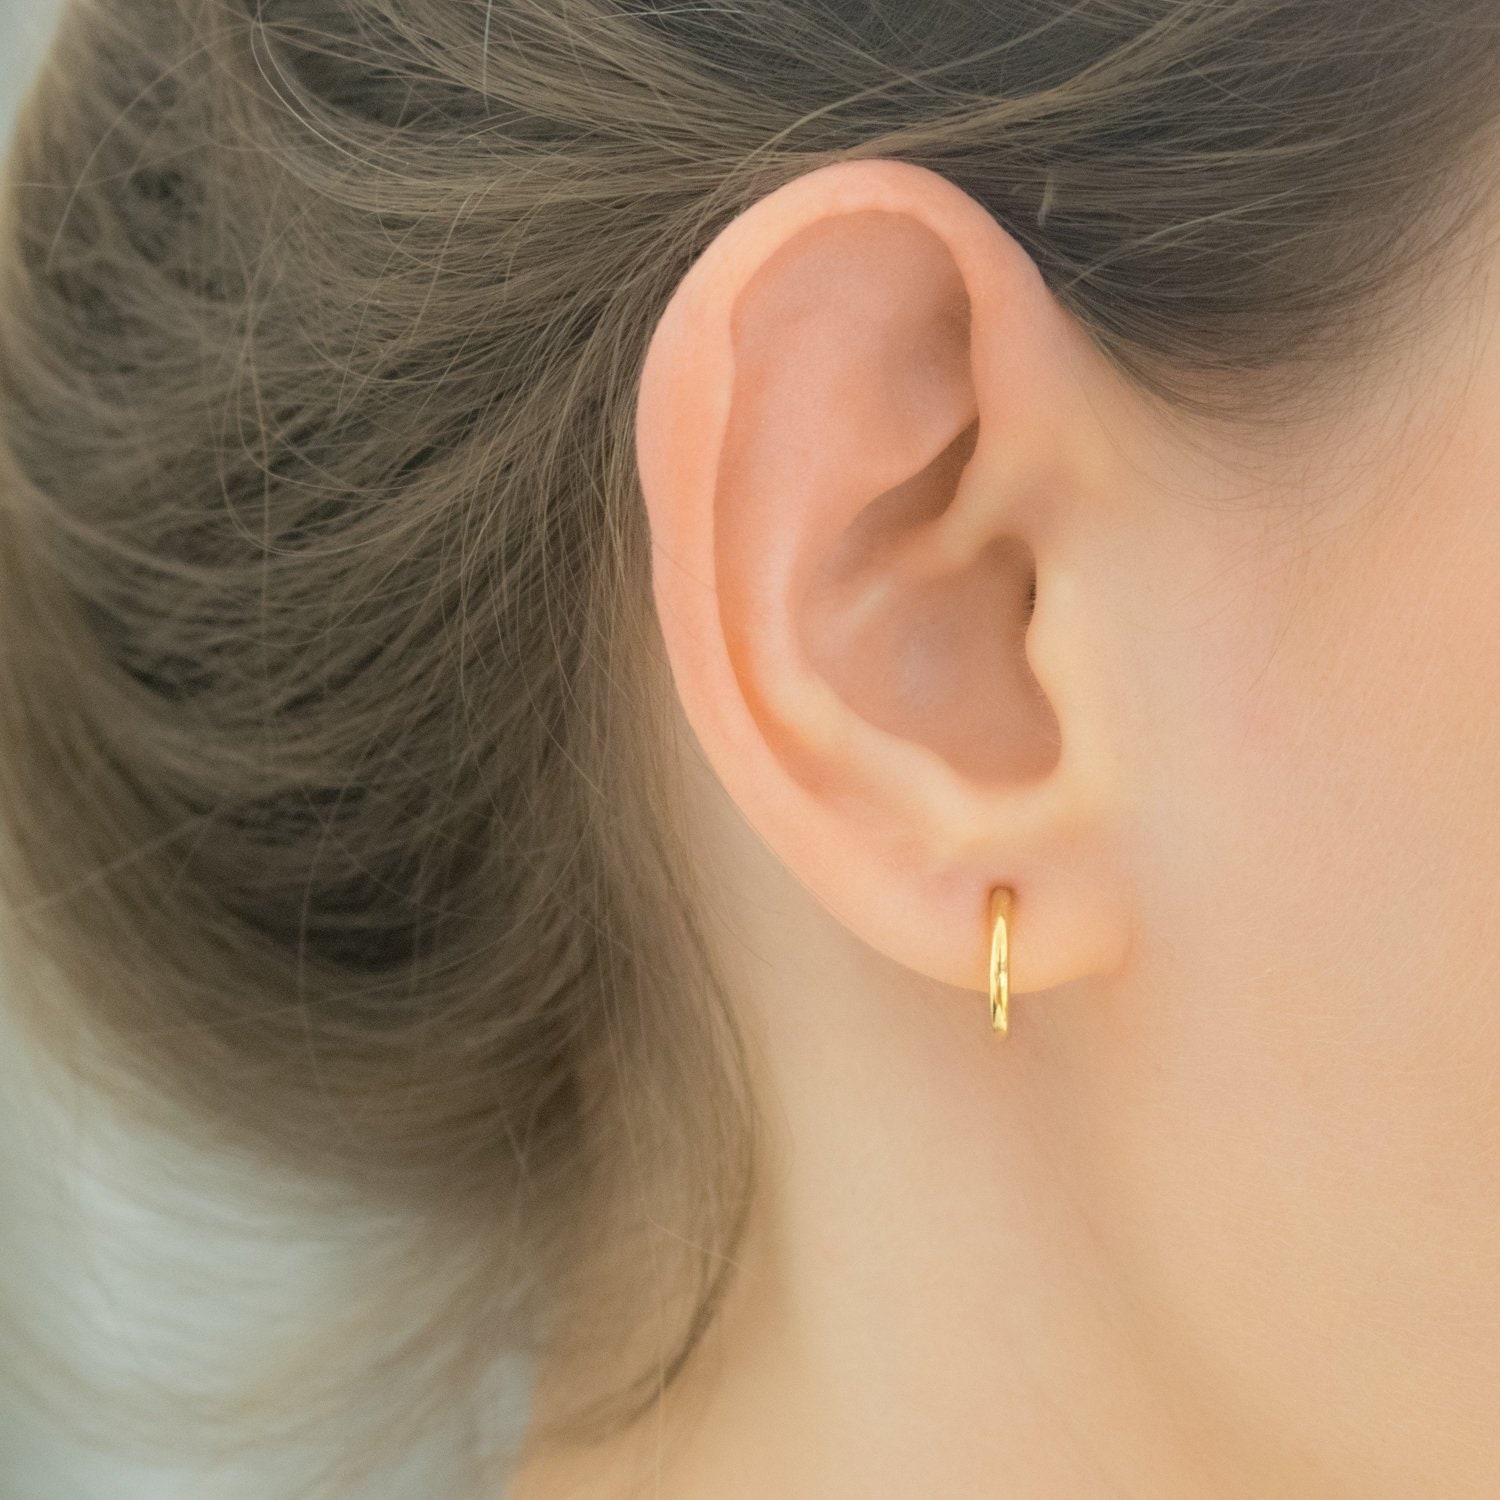 Why You Need to Switch to Flat Back Earrings